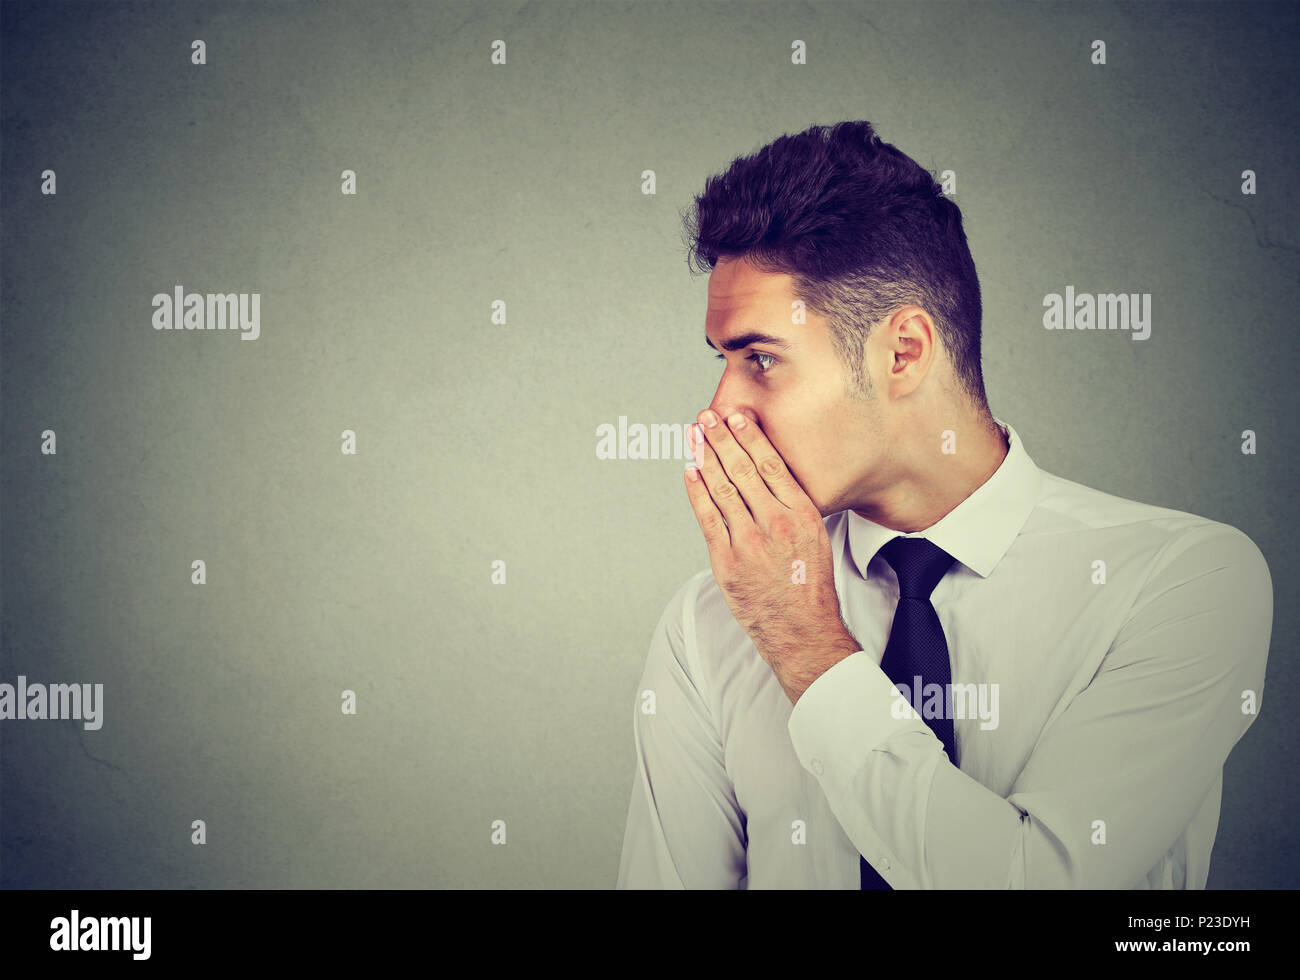 Business man whispering a gossip secret to someone isolated on gray background Stock Photo